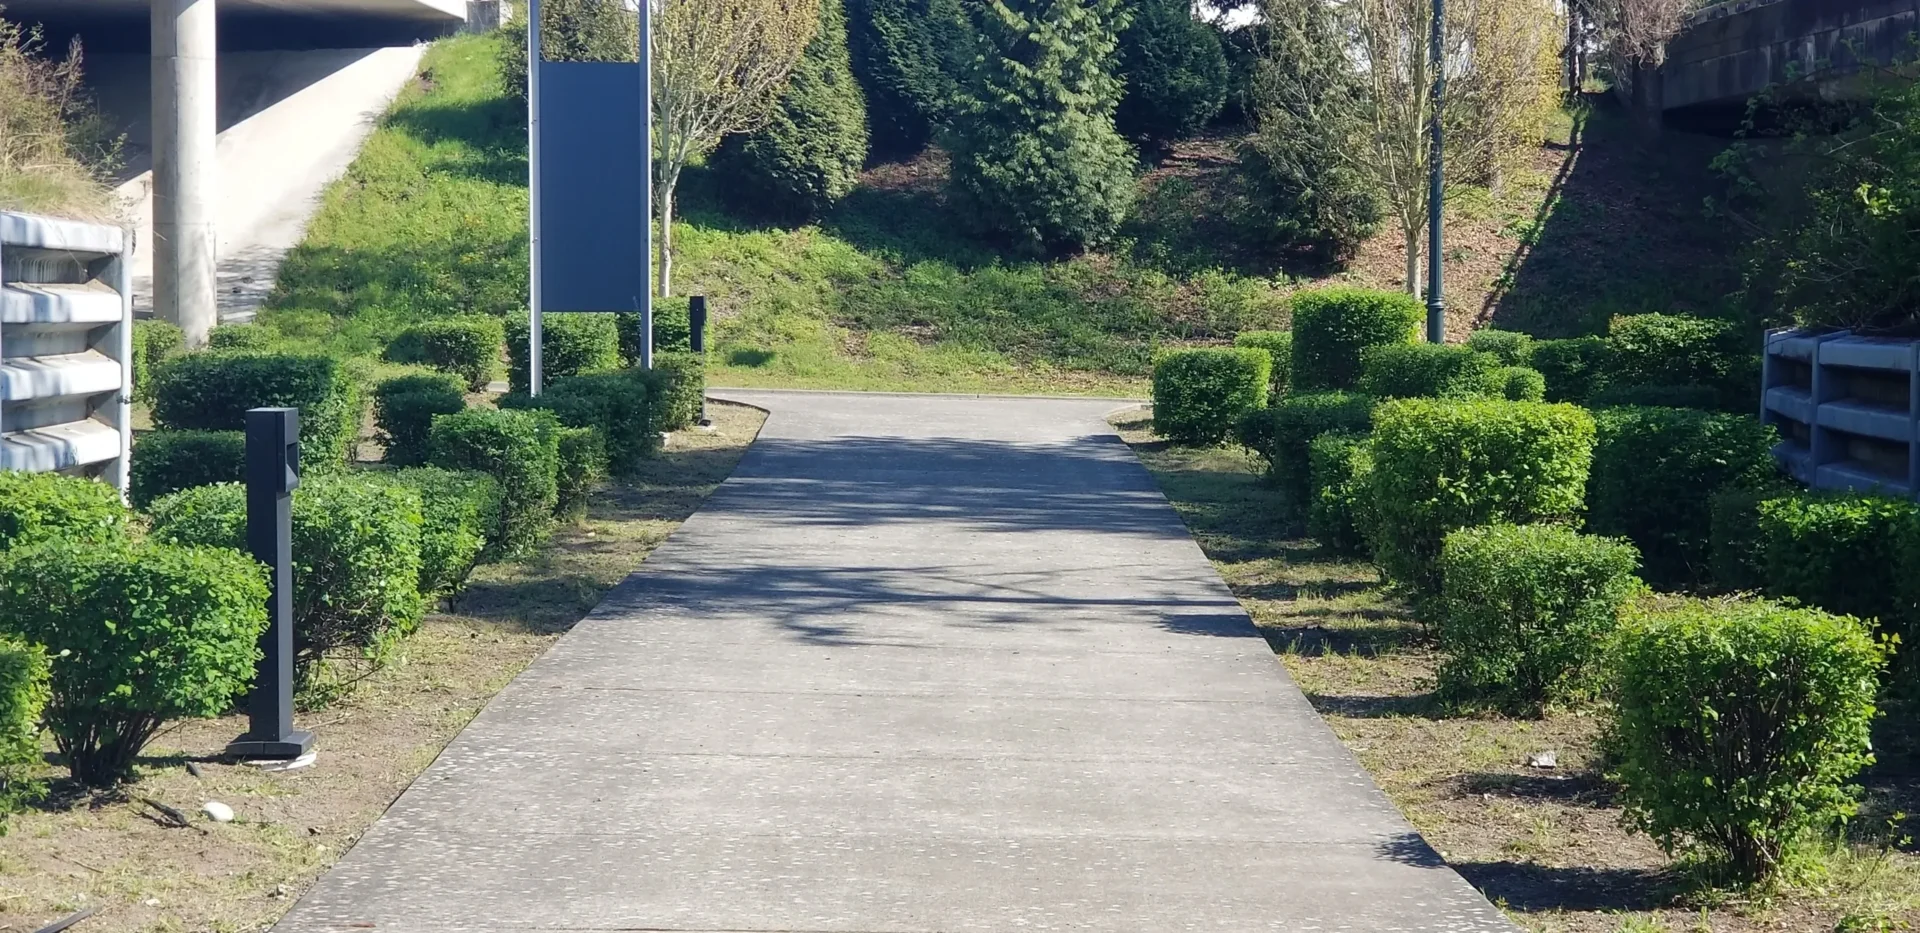 A paved road with bushes and trees in the background.